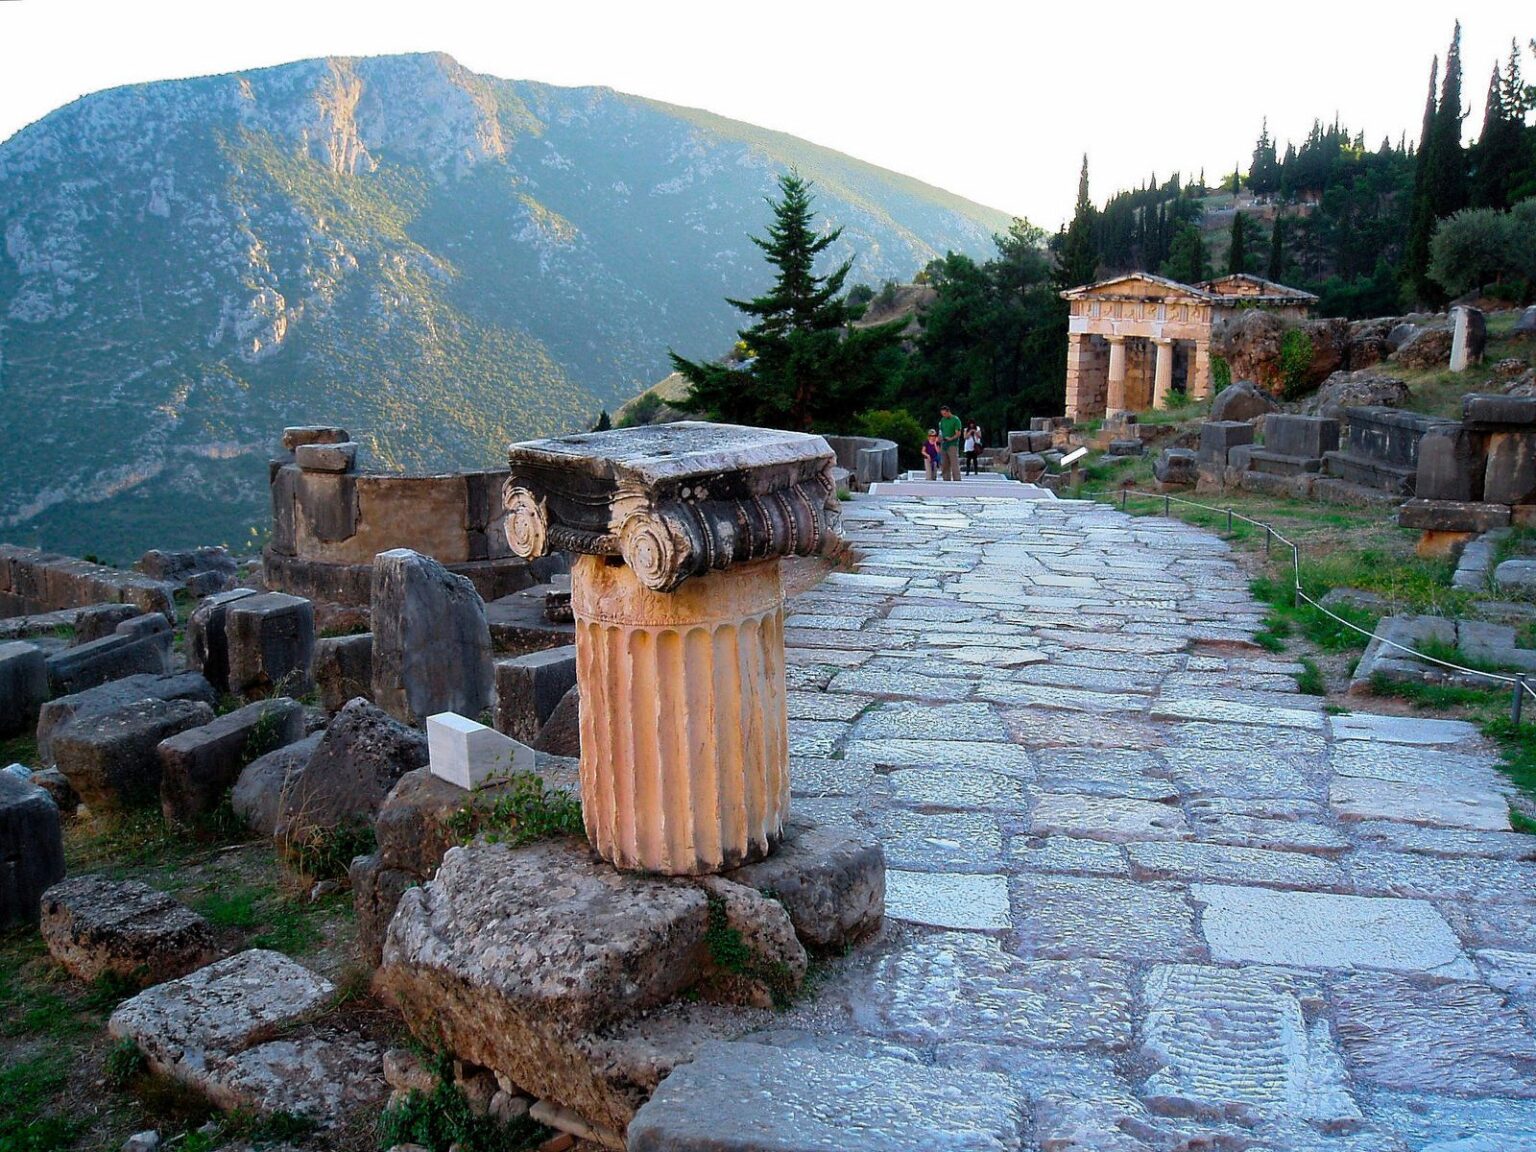 Delphi: The Mythical Oracle and Sacred Heartbeat of Ancient Greece